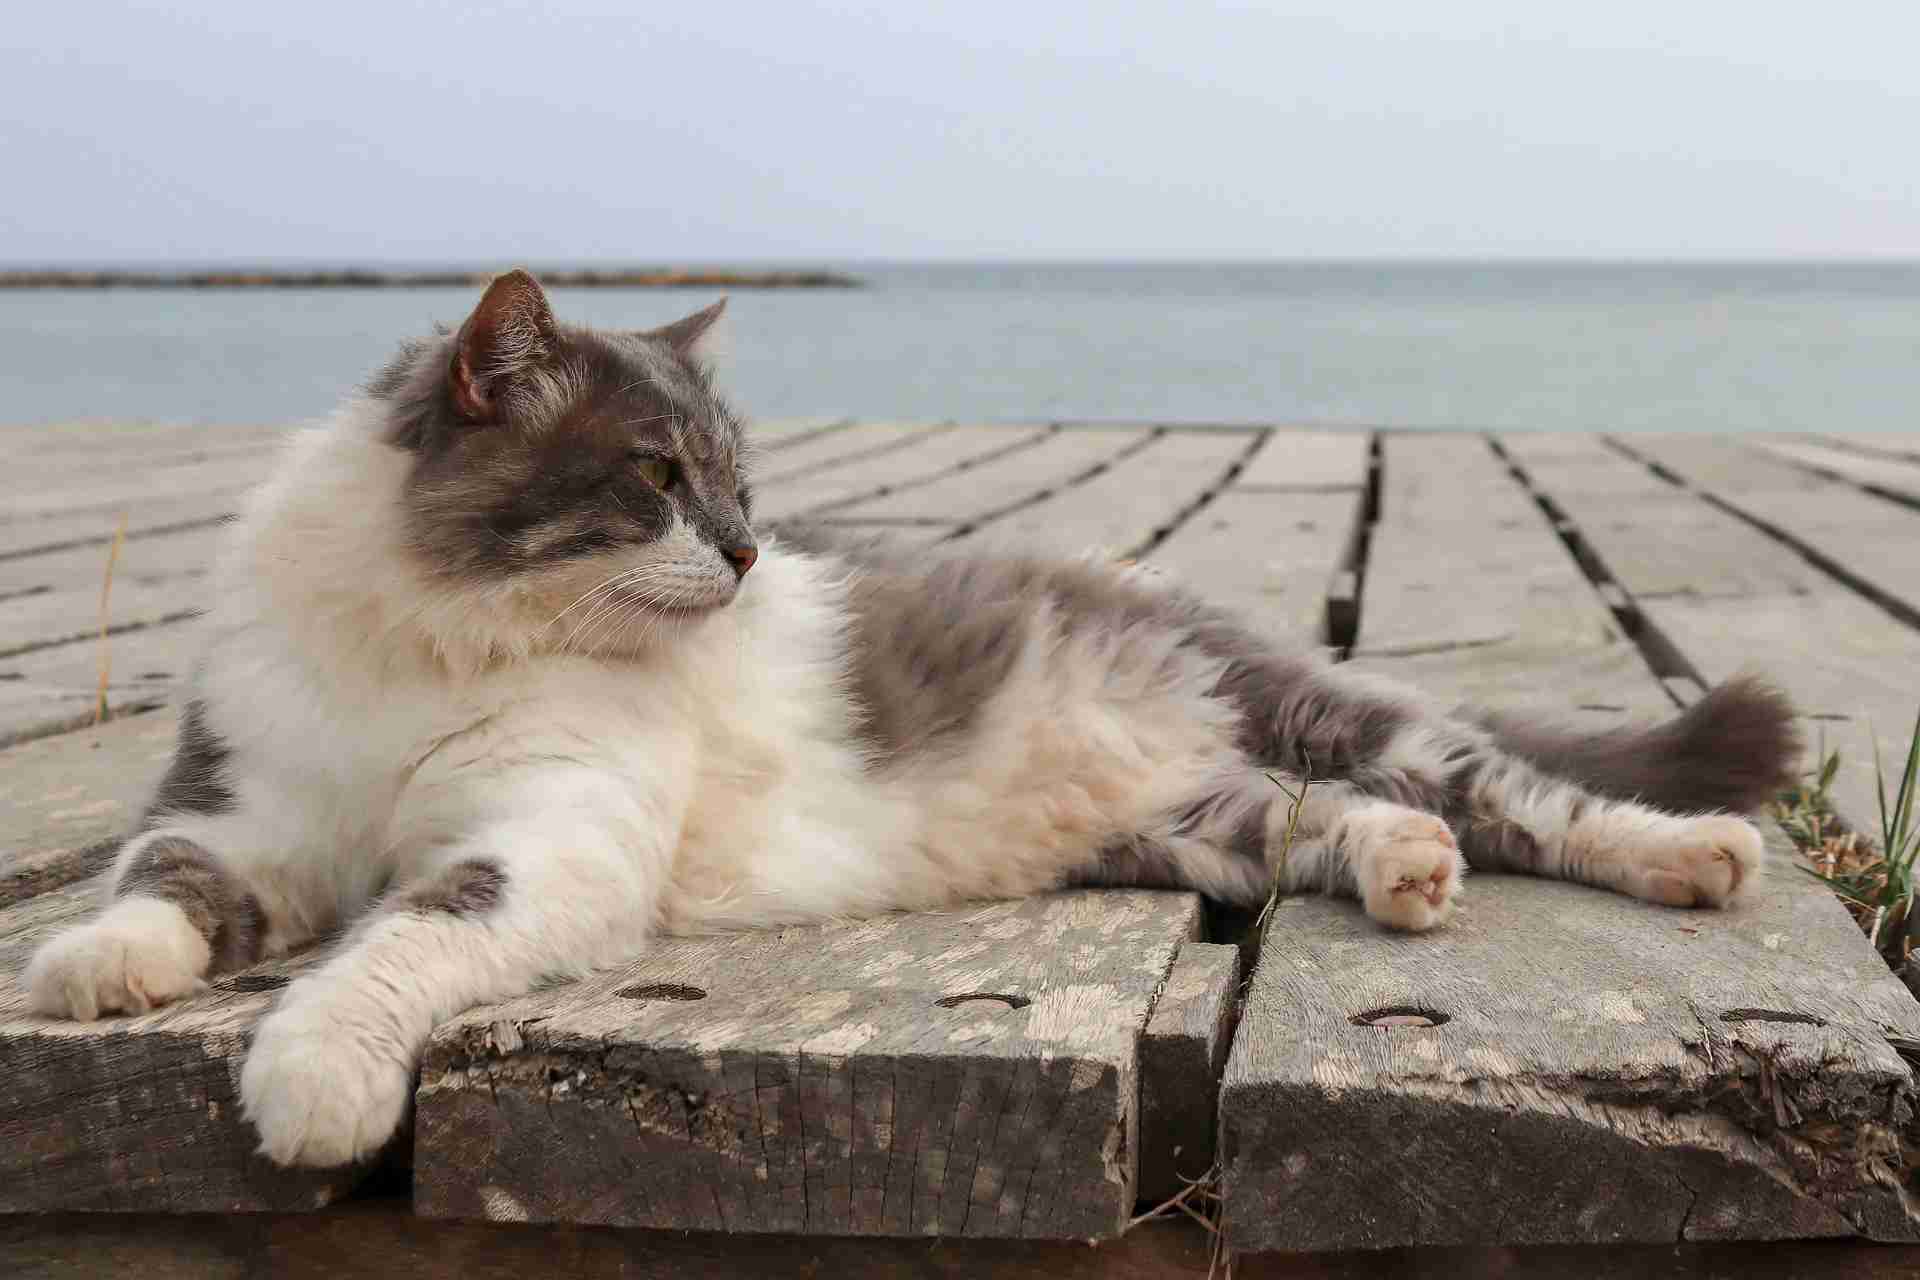 Taking your cat on holiday: home or away?